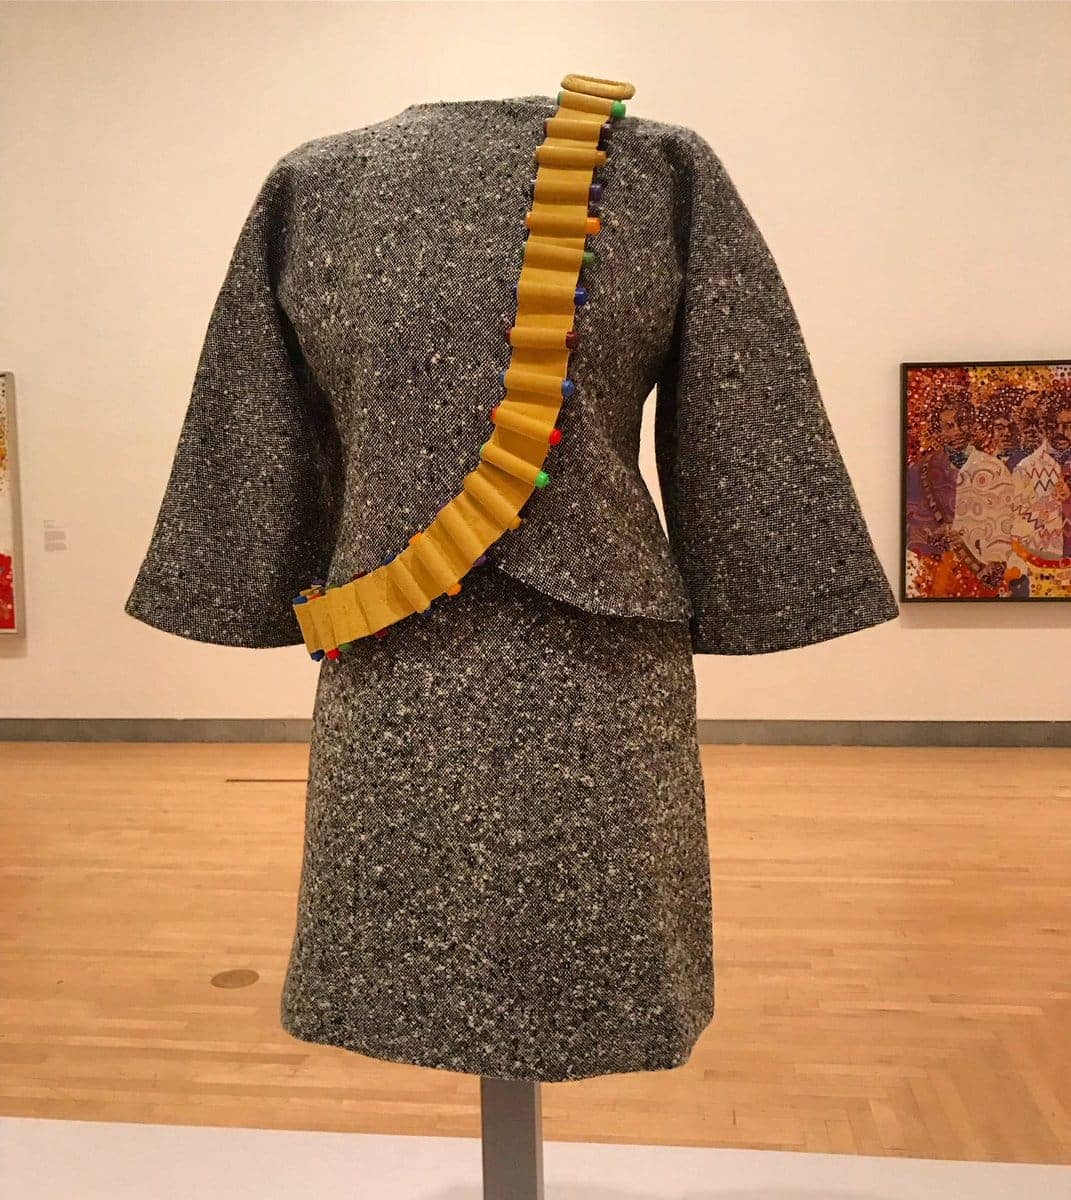 ‘Revolutionary-Suit-with-ammunition-belt-sewn-in-fashion-design-art-by-Jae-Jarrell, Take me home, Abolition Now! 